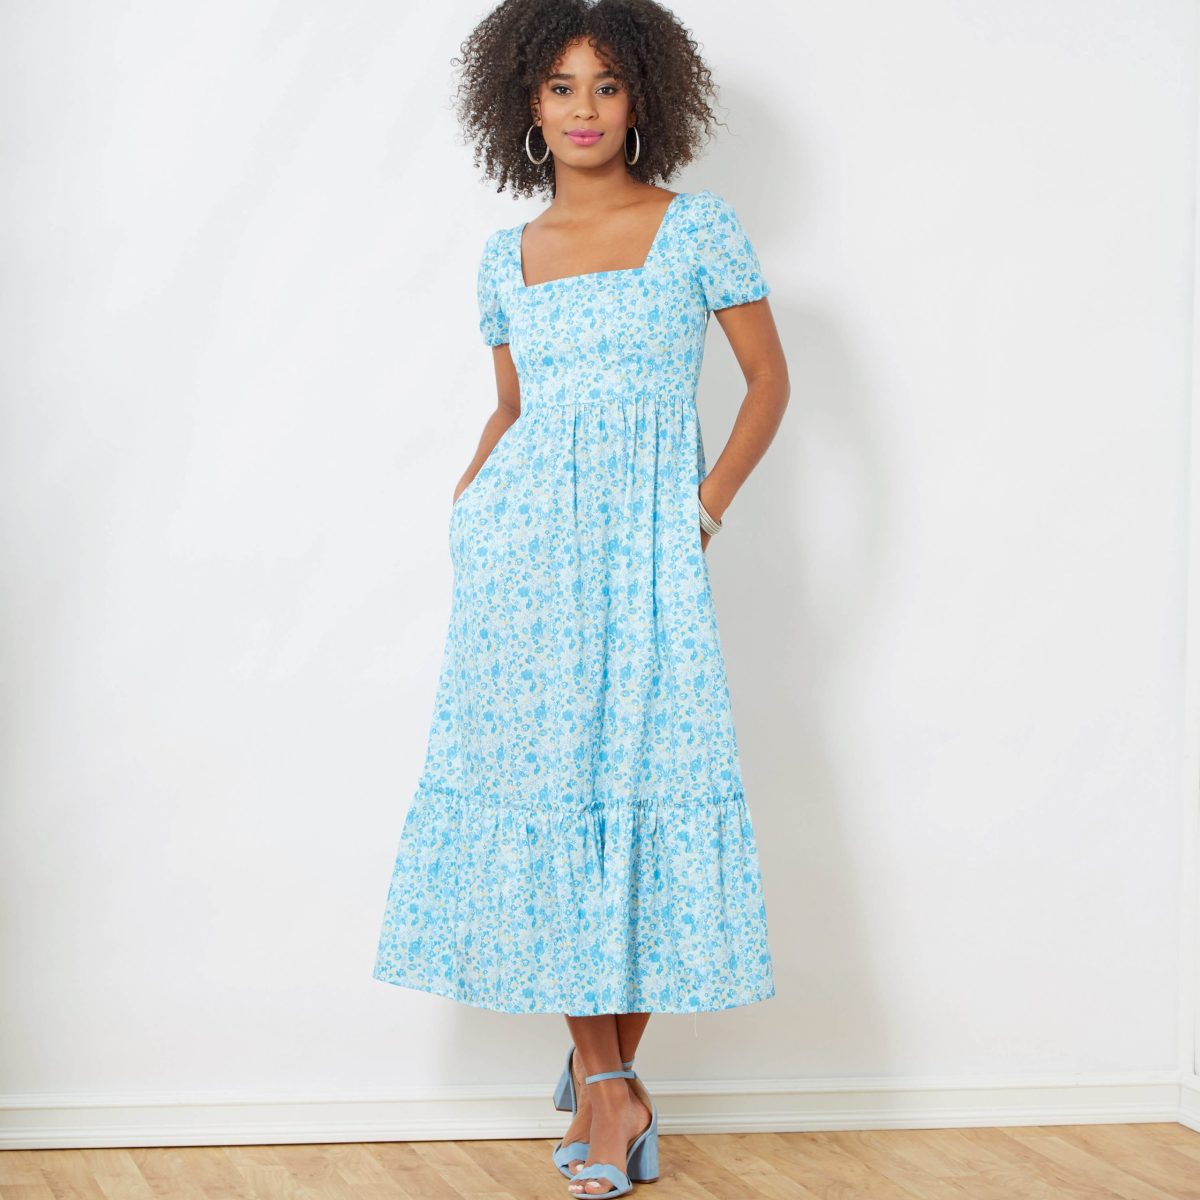 New Look 6519: An easy travel dress – Elle Gee Makes